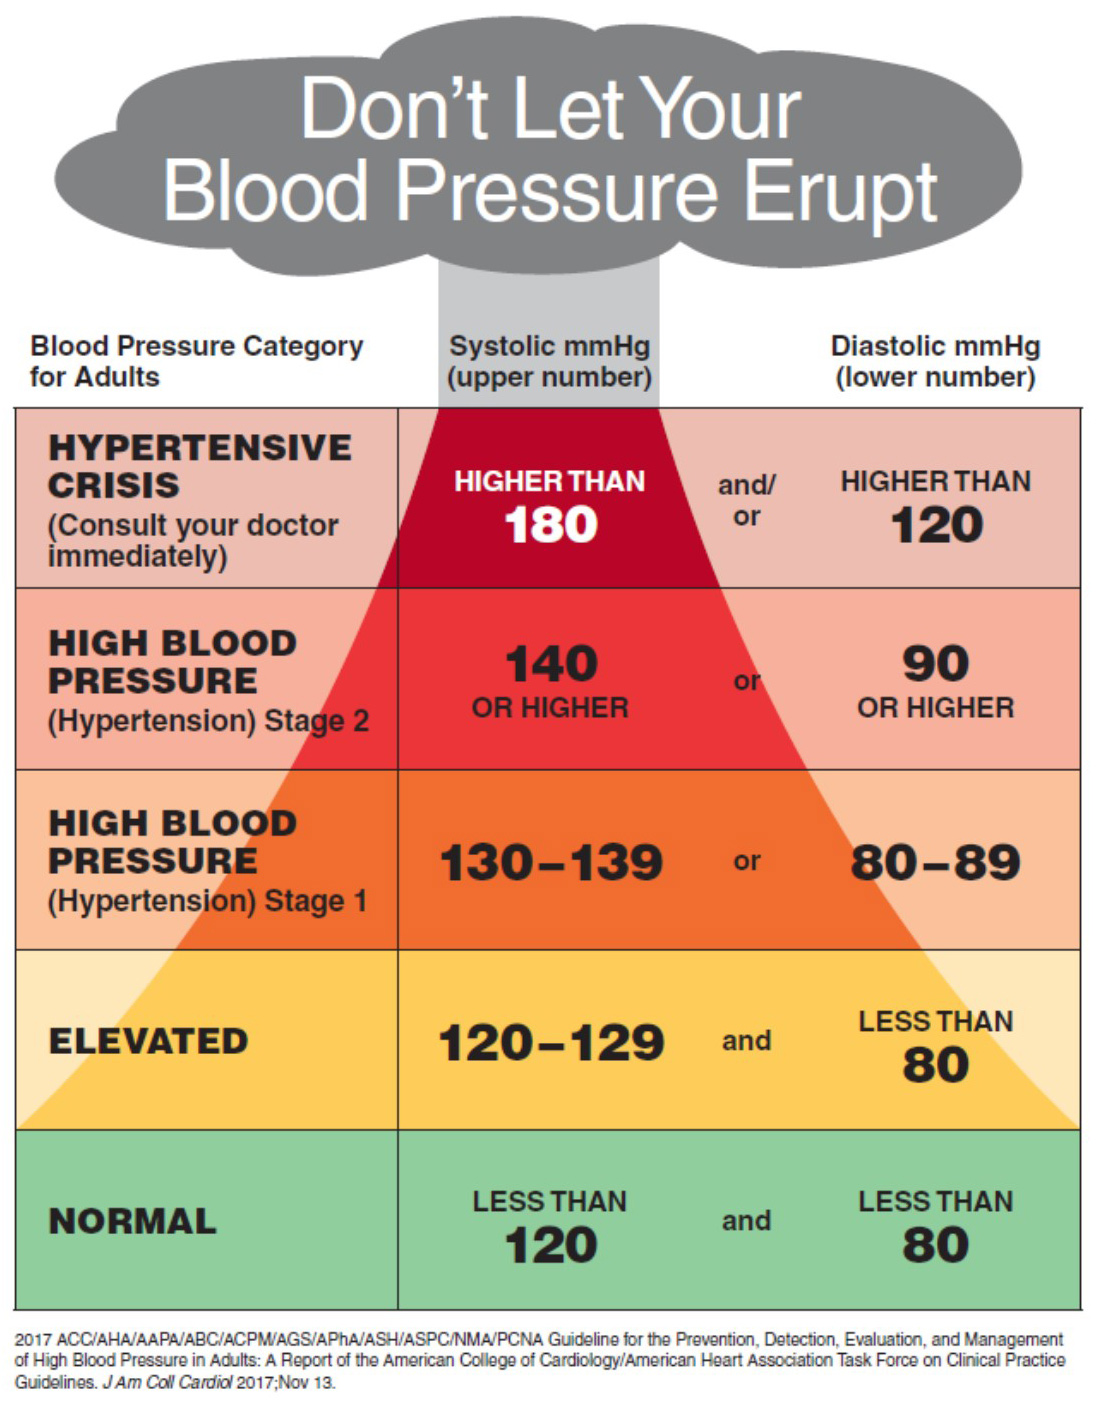 high blood pressure numbers considered high